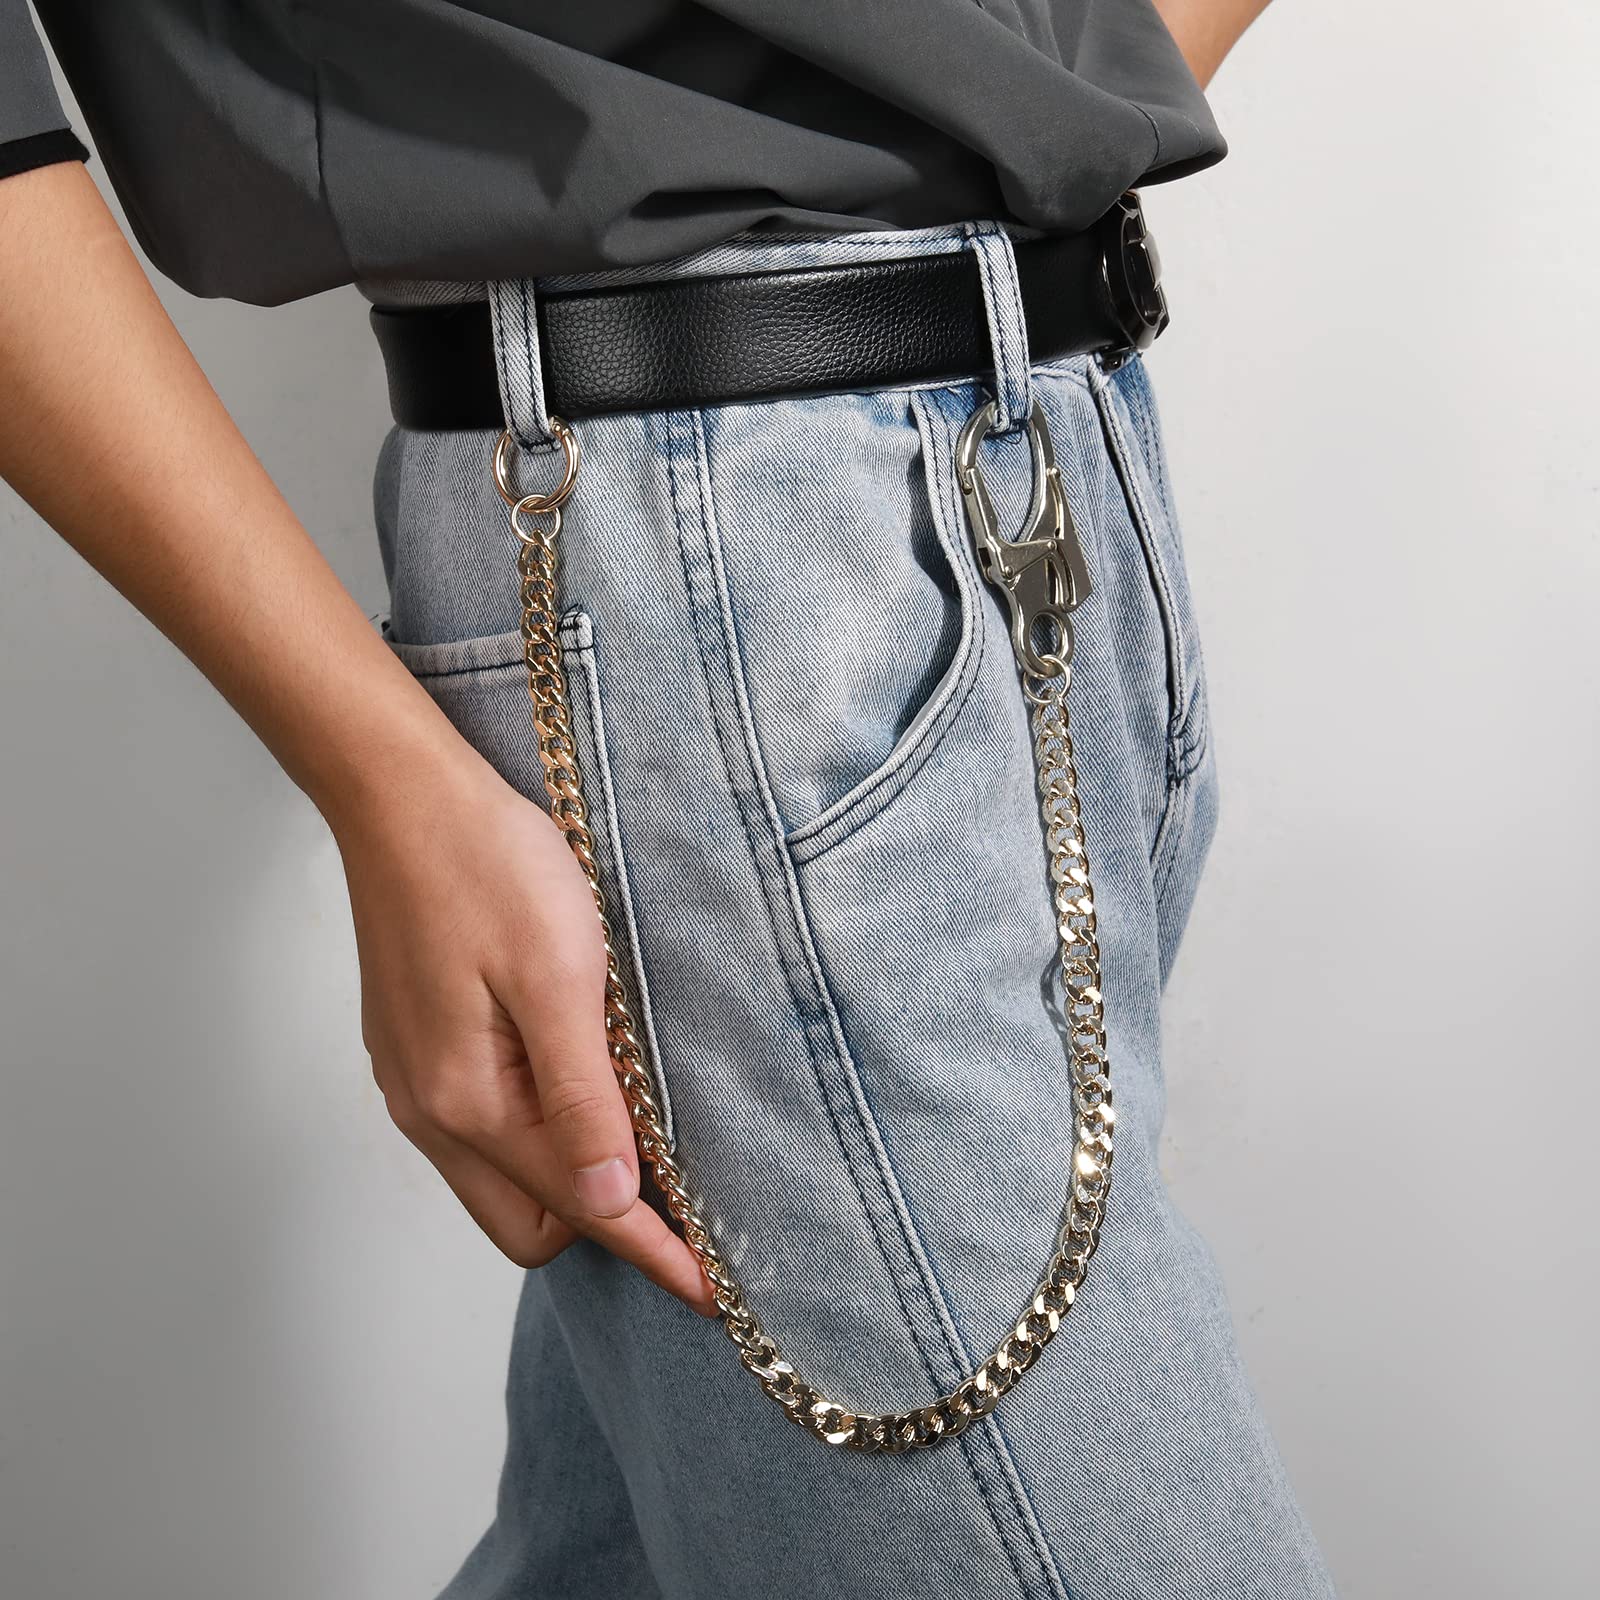 Ahiller Biker Wallet Chain, Heavy Duty Pocket Chain with Round Clasp, Men Chains for Keys, Jeans, Pants, Purse and Handbag